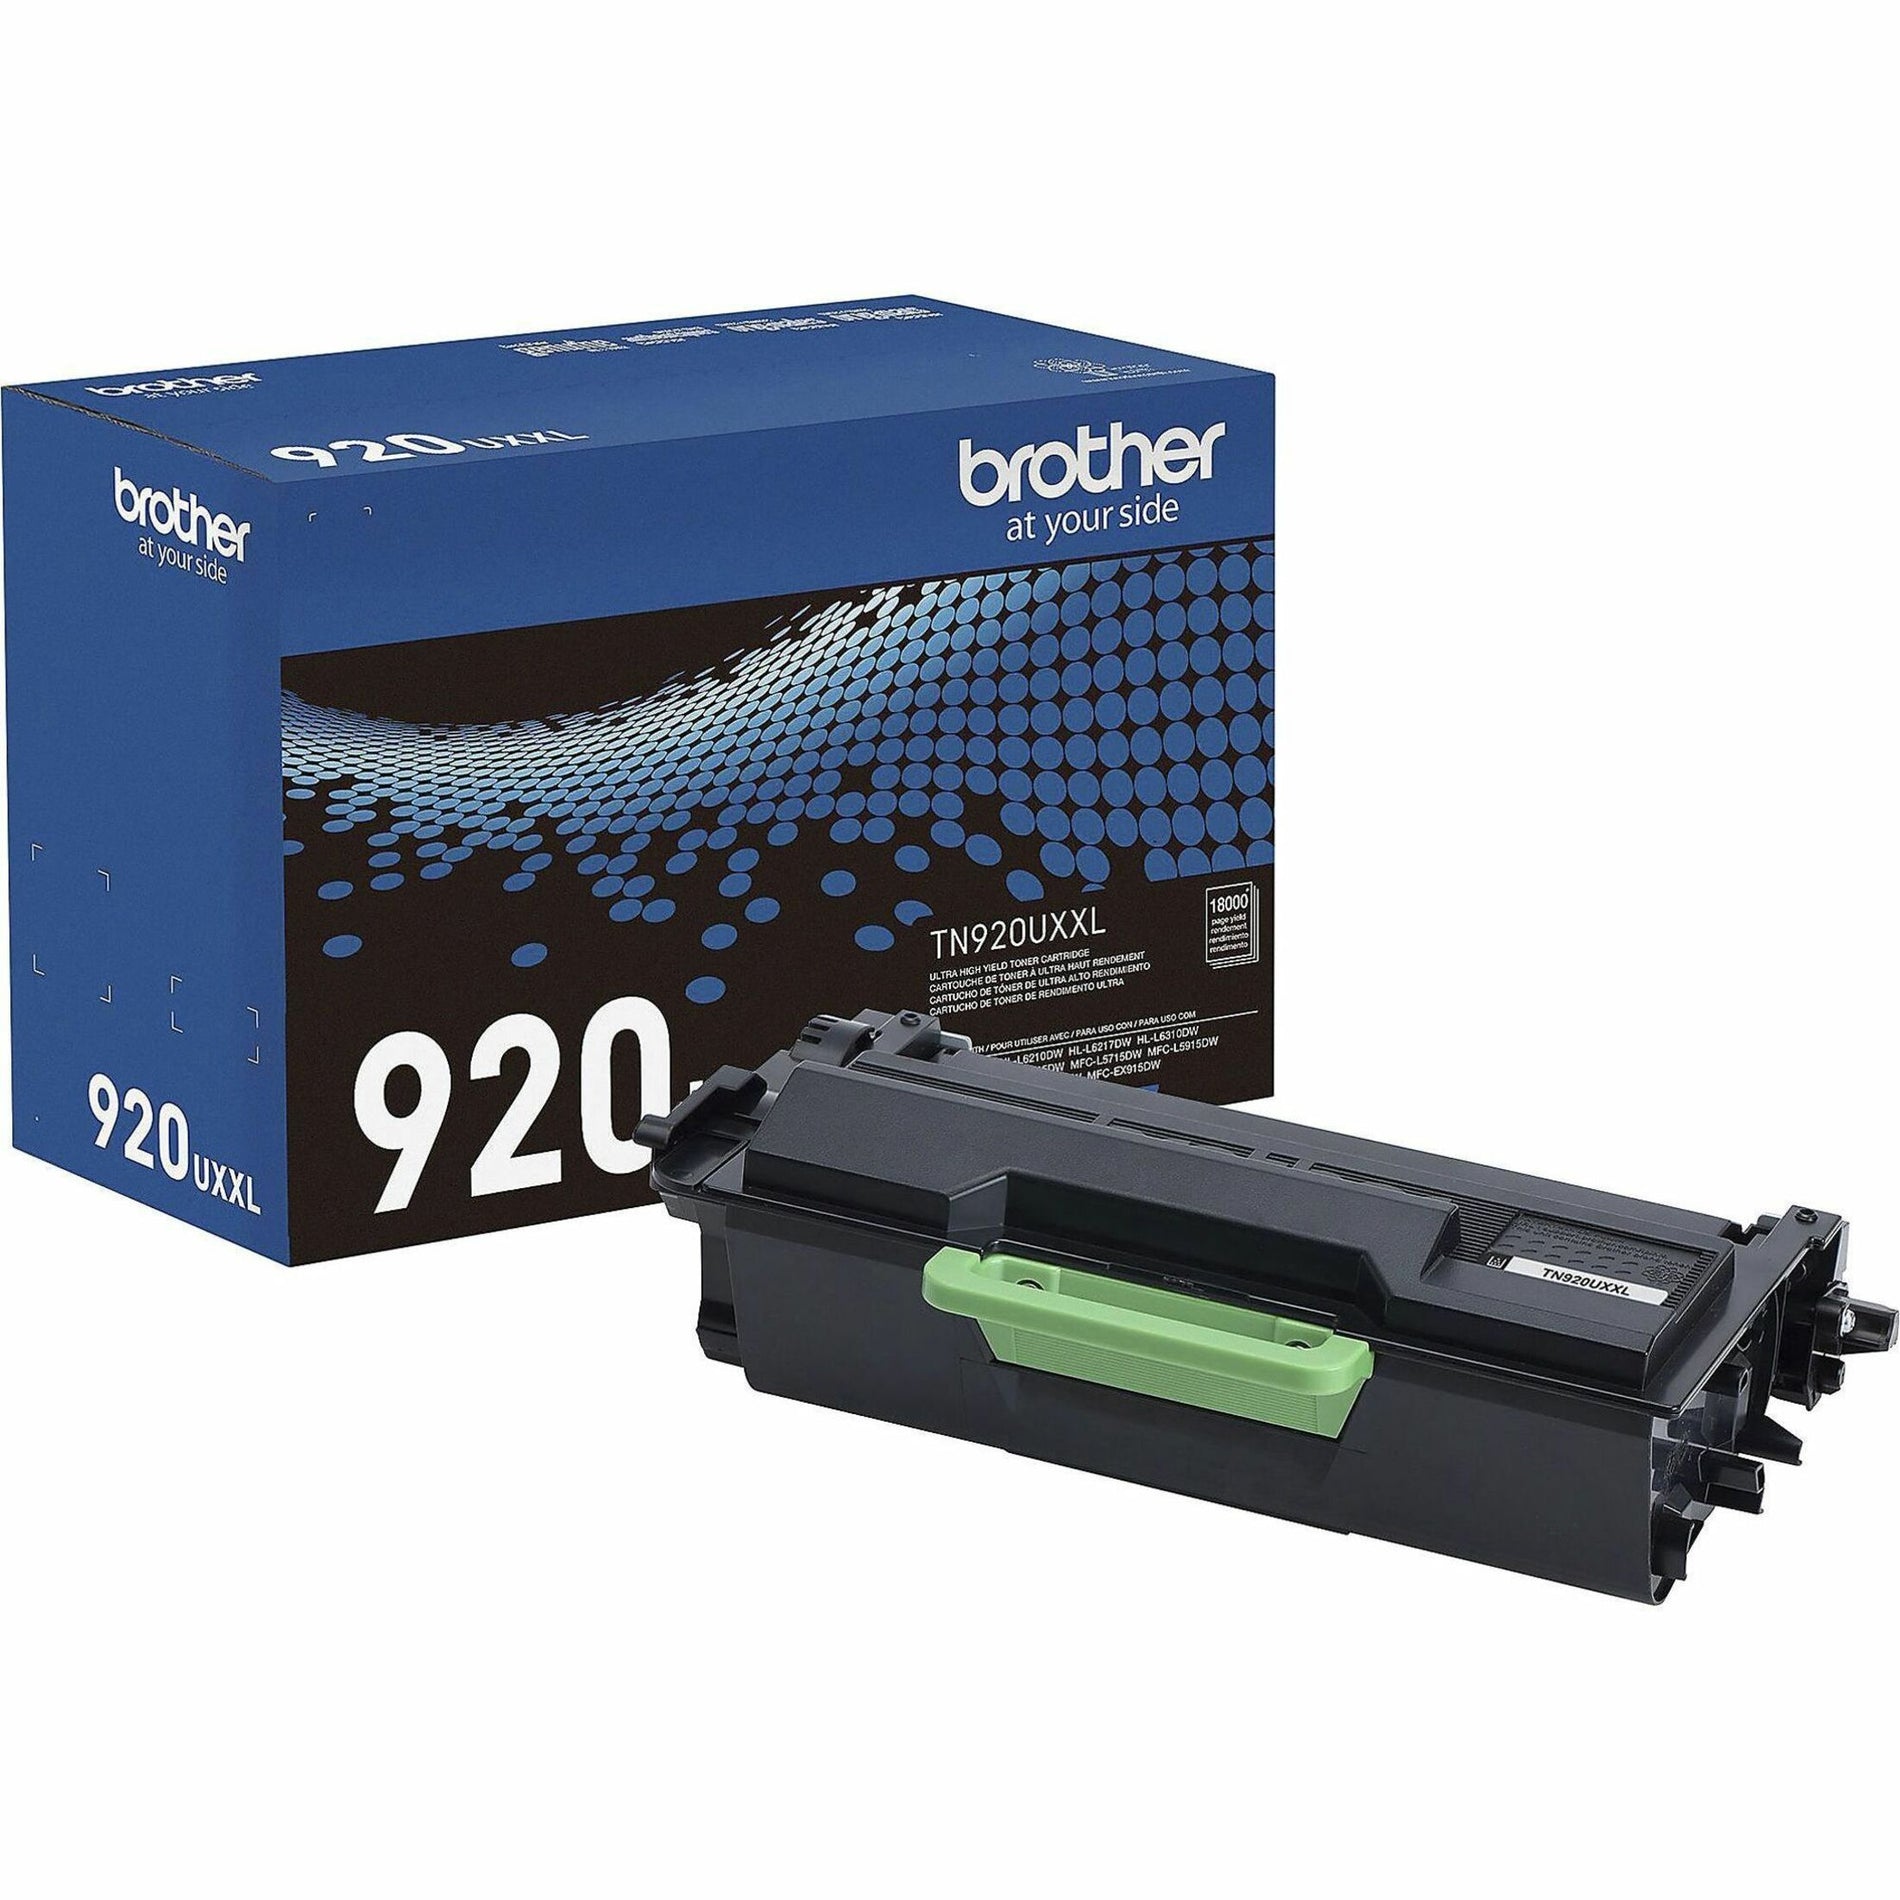 Brother TN920UXXL Ultra High-yield Toner Cartridge, Black, 18000 Pages